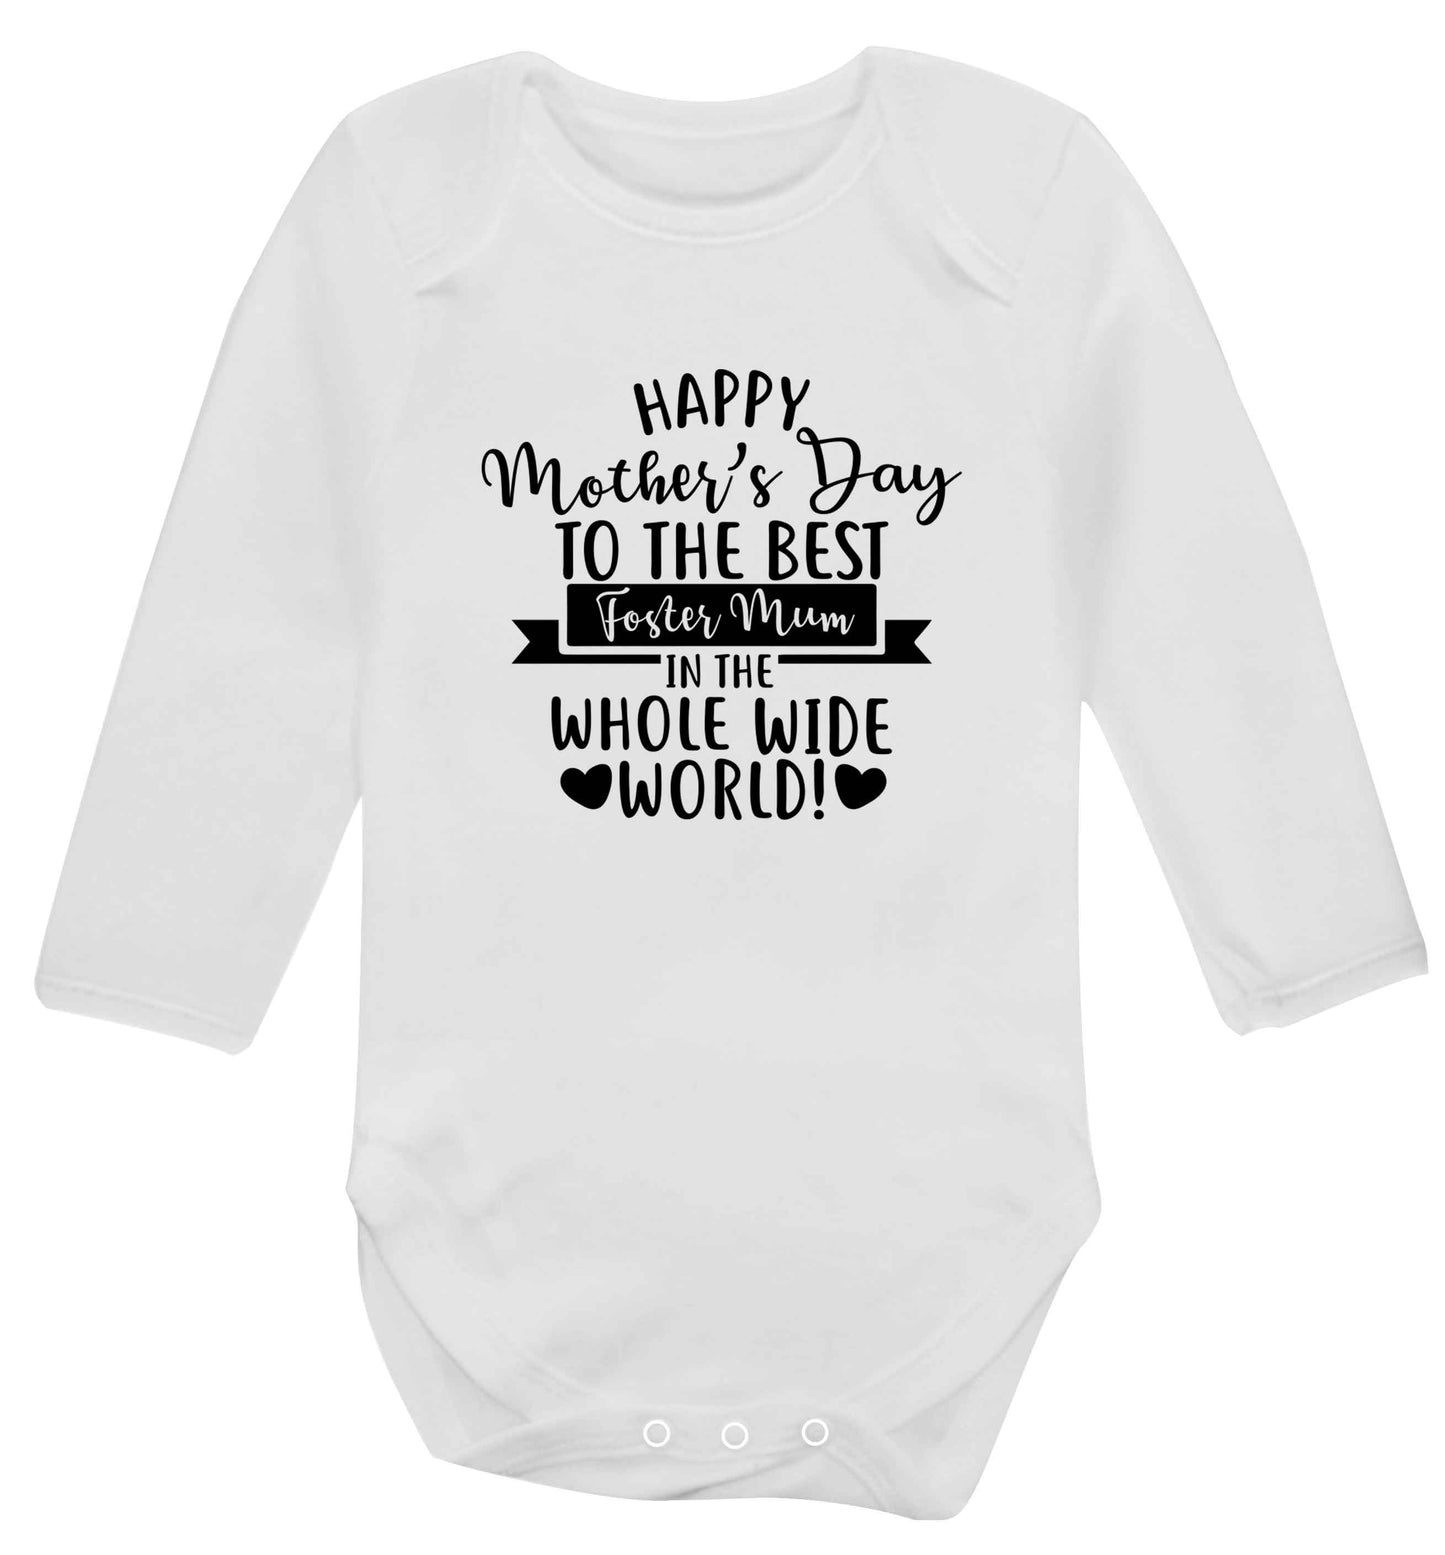 Happy mother's day to the best foster mum in the world baby vest long sleeved white 6-12 months